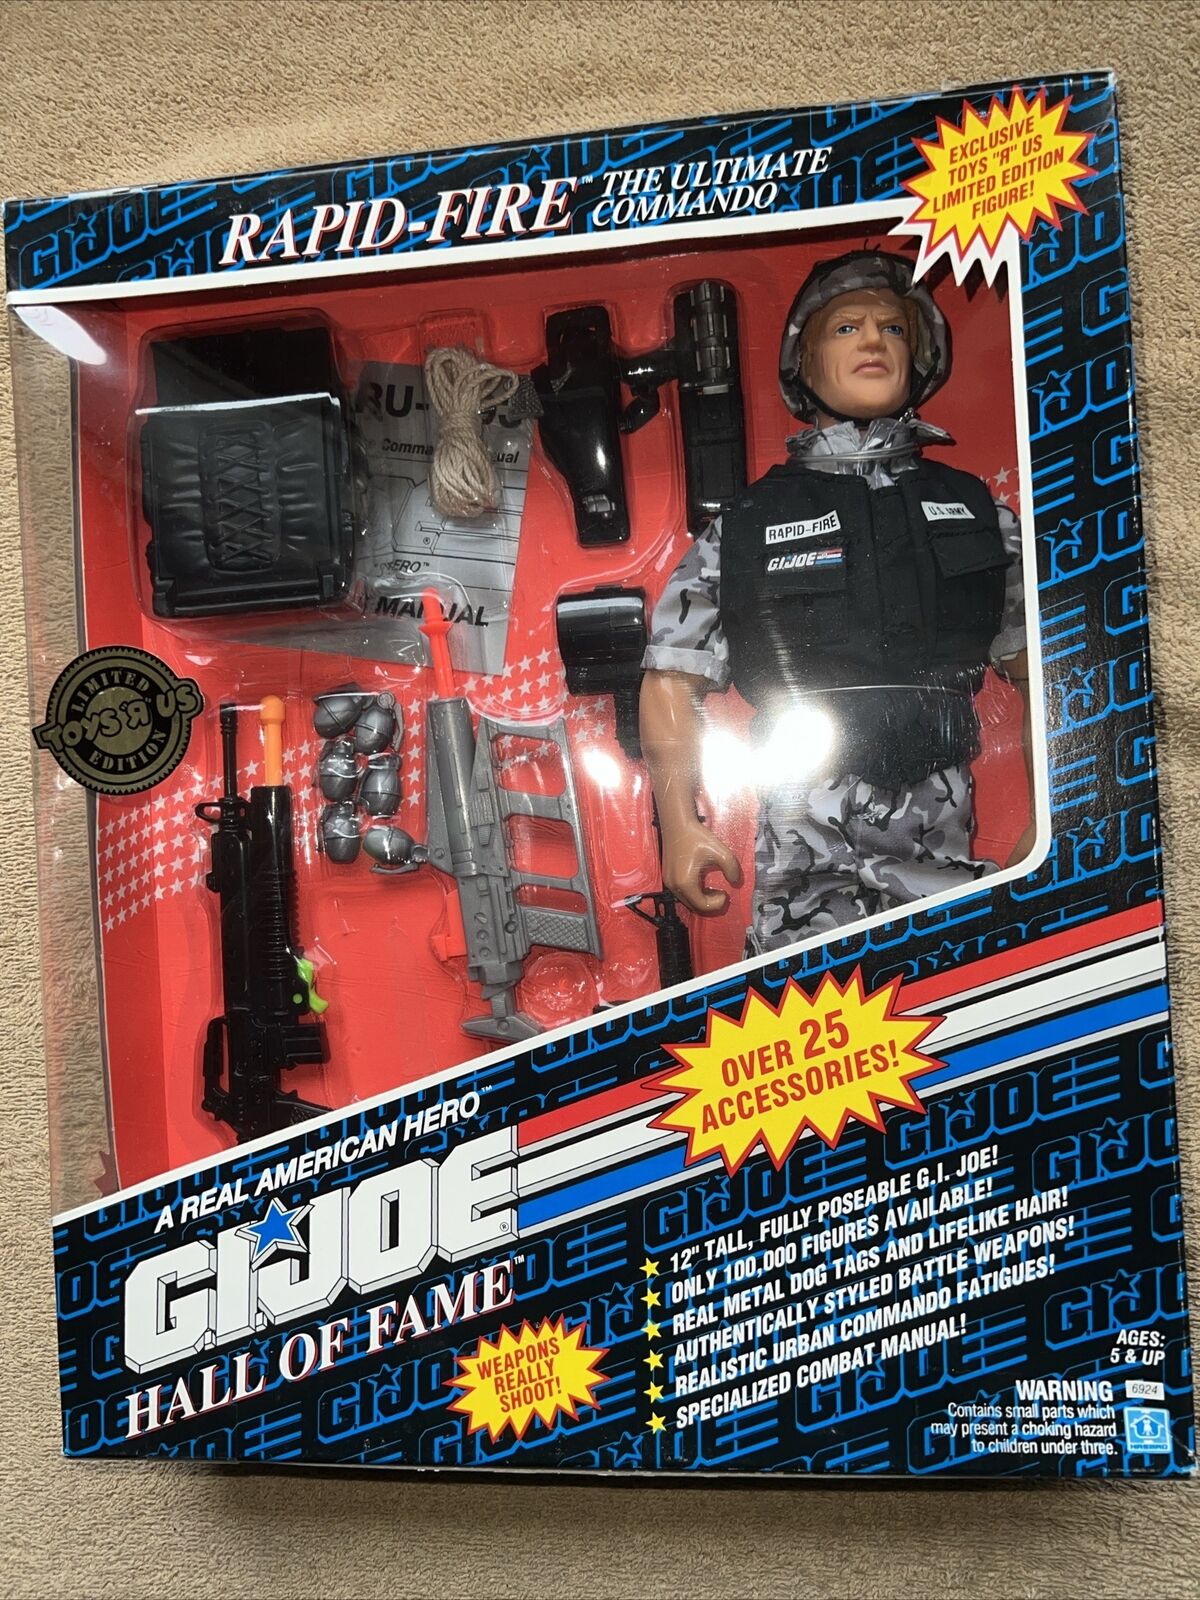 GI JOE HALL OF FAME RAPID FIRE 12" FIGURE TOYS R US EXCLUSIVE LIMITED EDITION